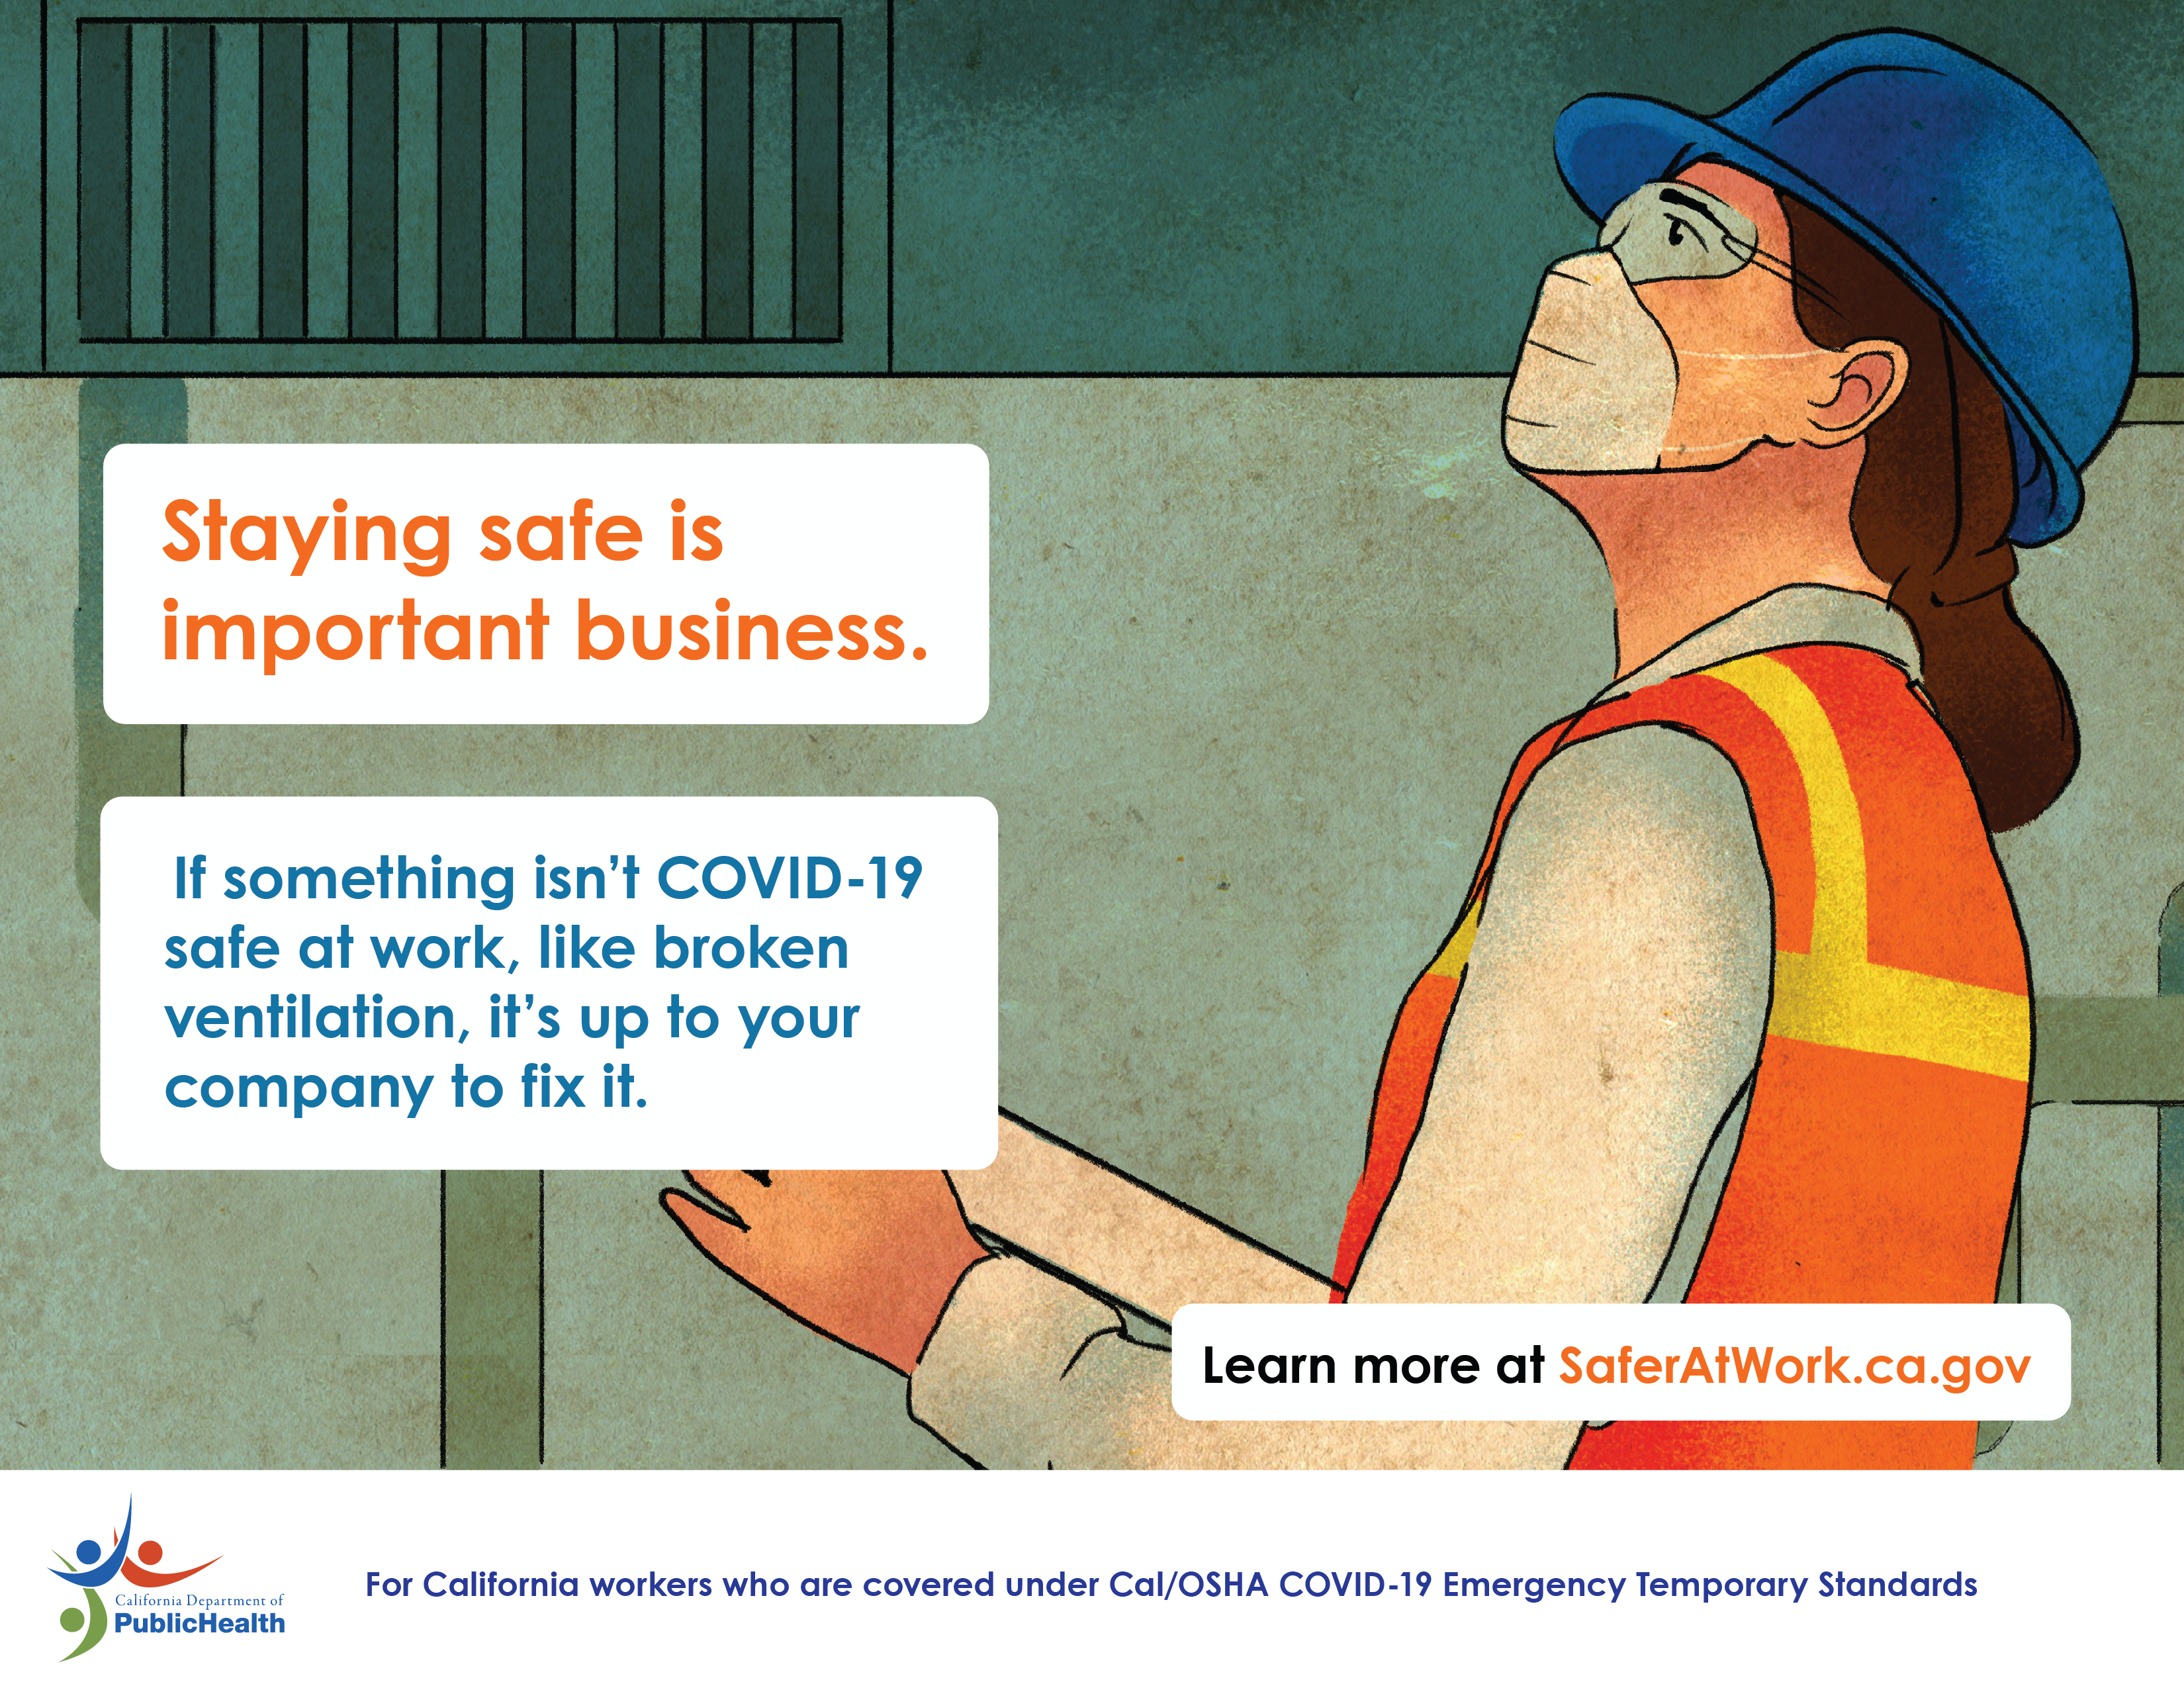 Inspector inspects vents in a building. Text: Staying safe is important business. If something isn't COVID-19 safe at work ...